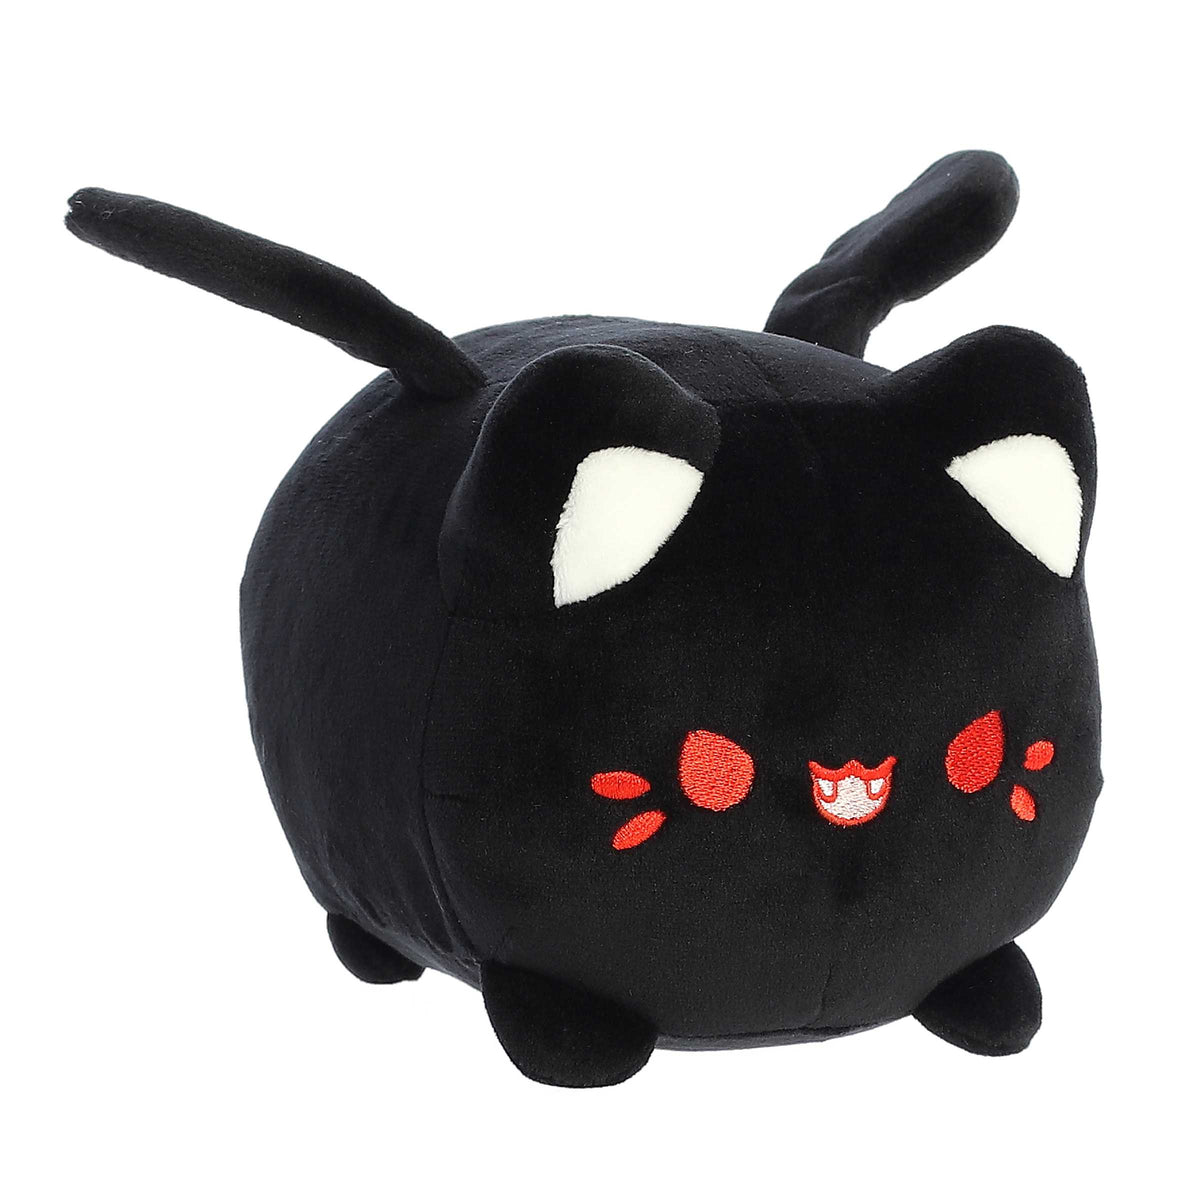 Black cat stuffed animal with vampire wings on its back and embroidered red eyes, whiskers and adorable fangs.